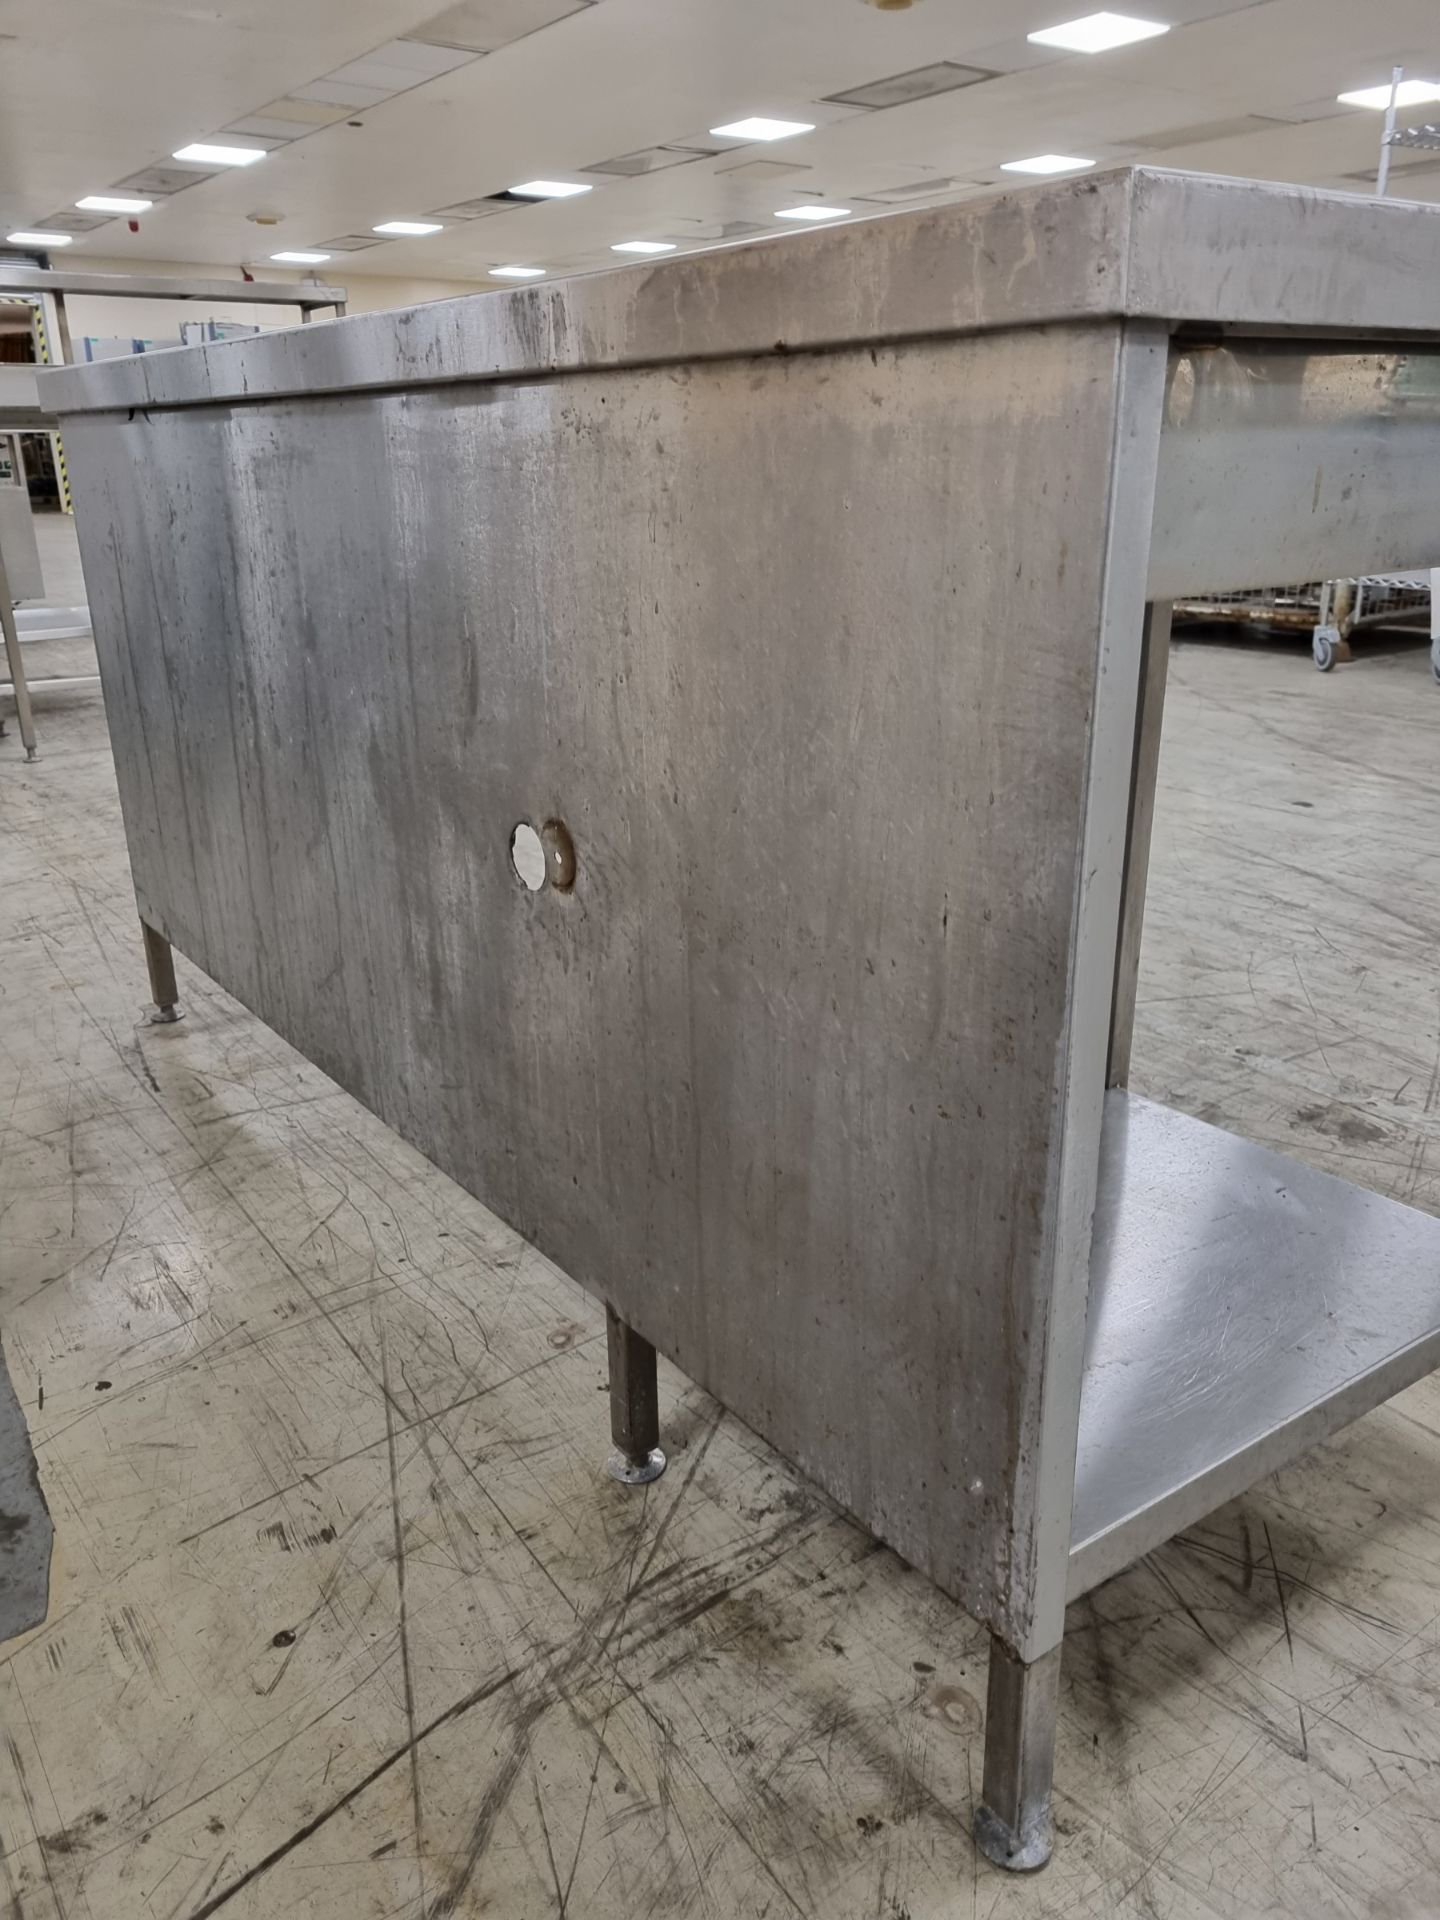 Stainless steel countertop with shelf and back wall - 65x180x92cm - Image 7 of 7